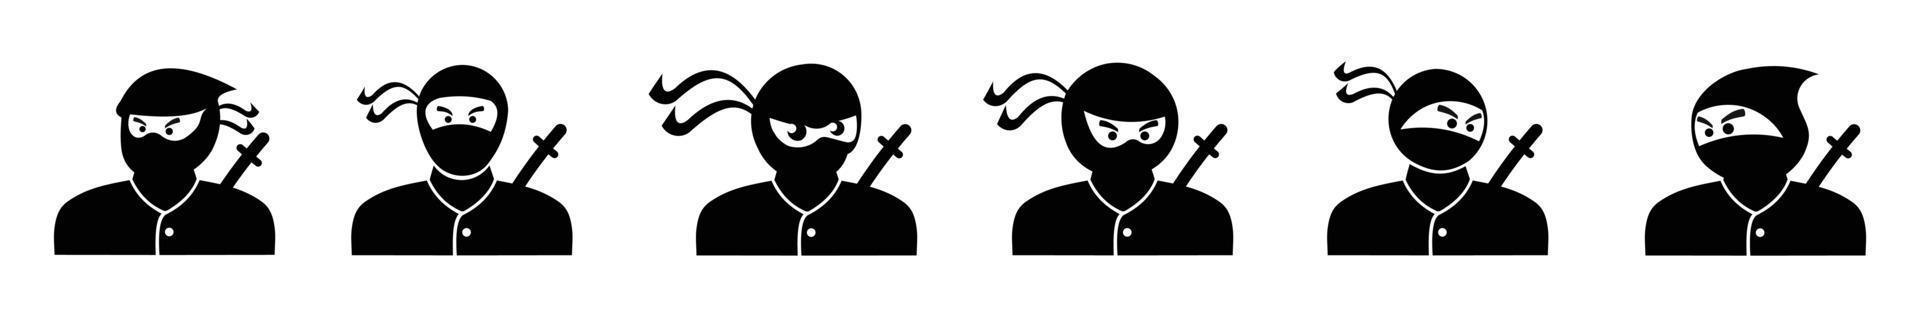 set of silhouette icon ninja design,Set of  ninjas in various poses  on white background vector